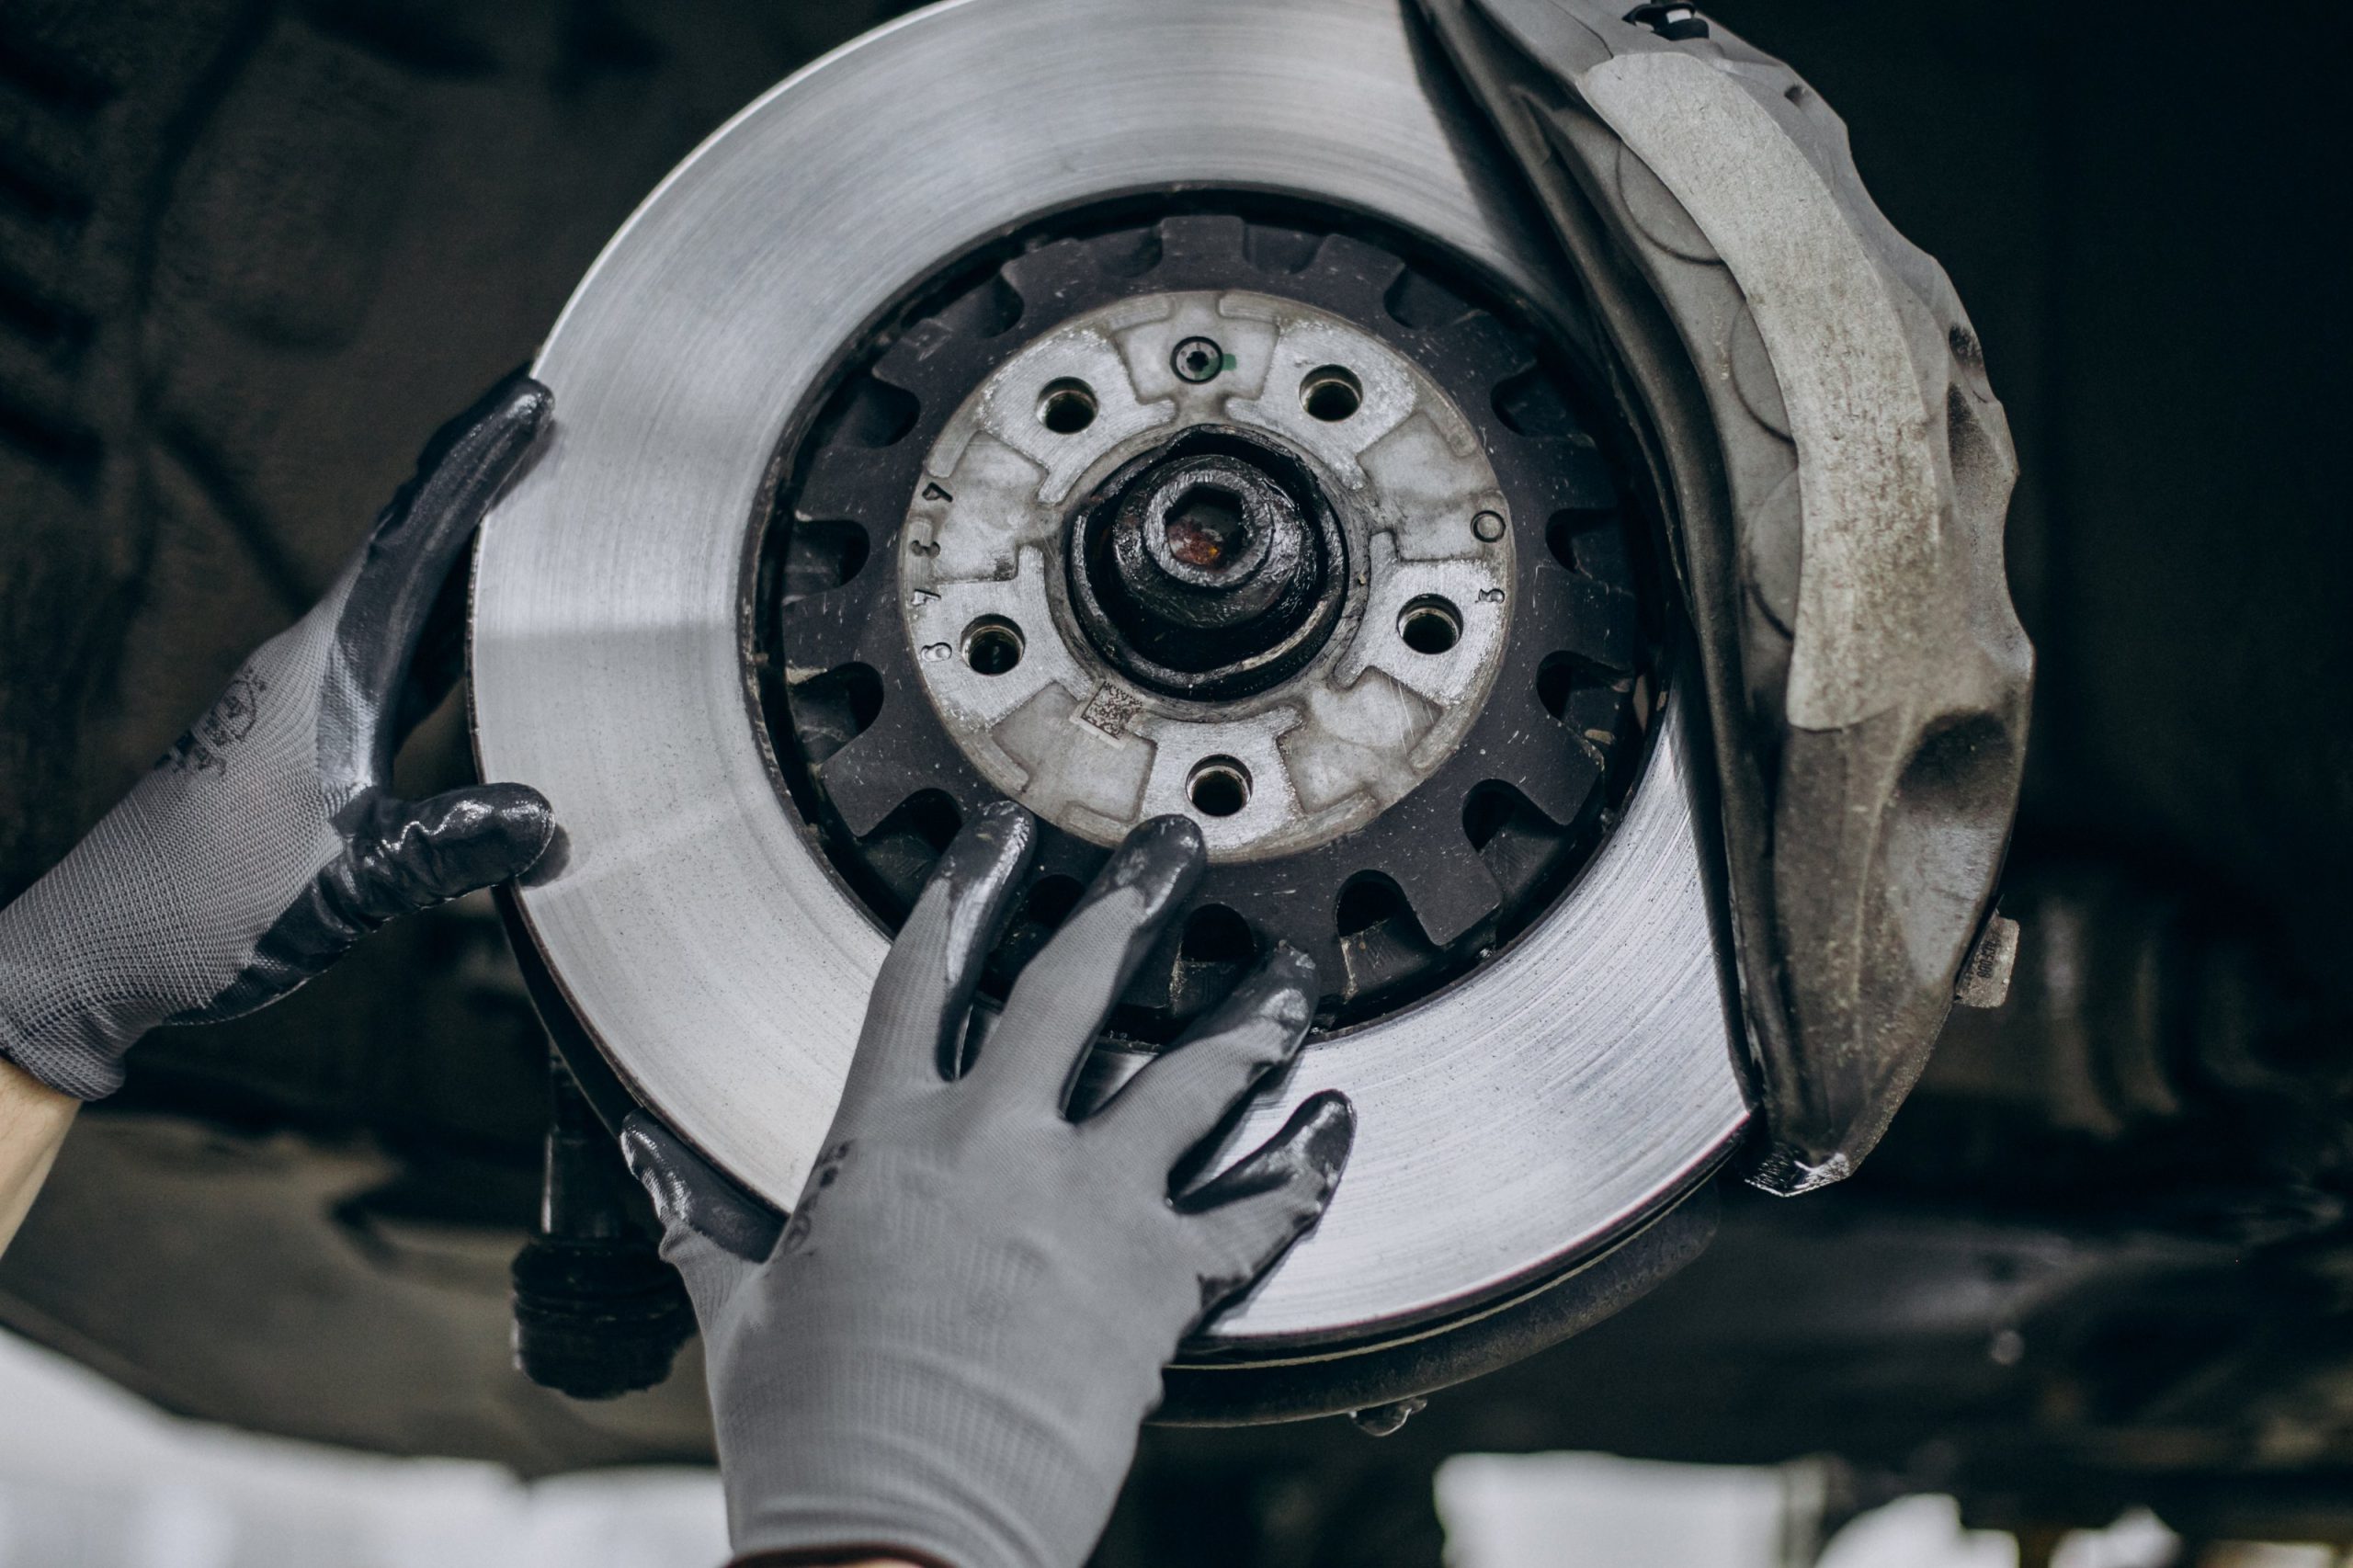 Mechanic replacing brake discs and inspecting a clutch pressure plate